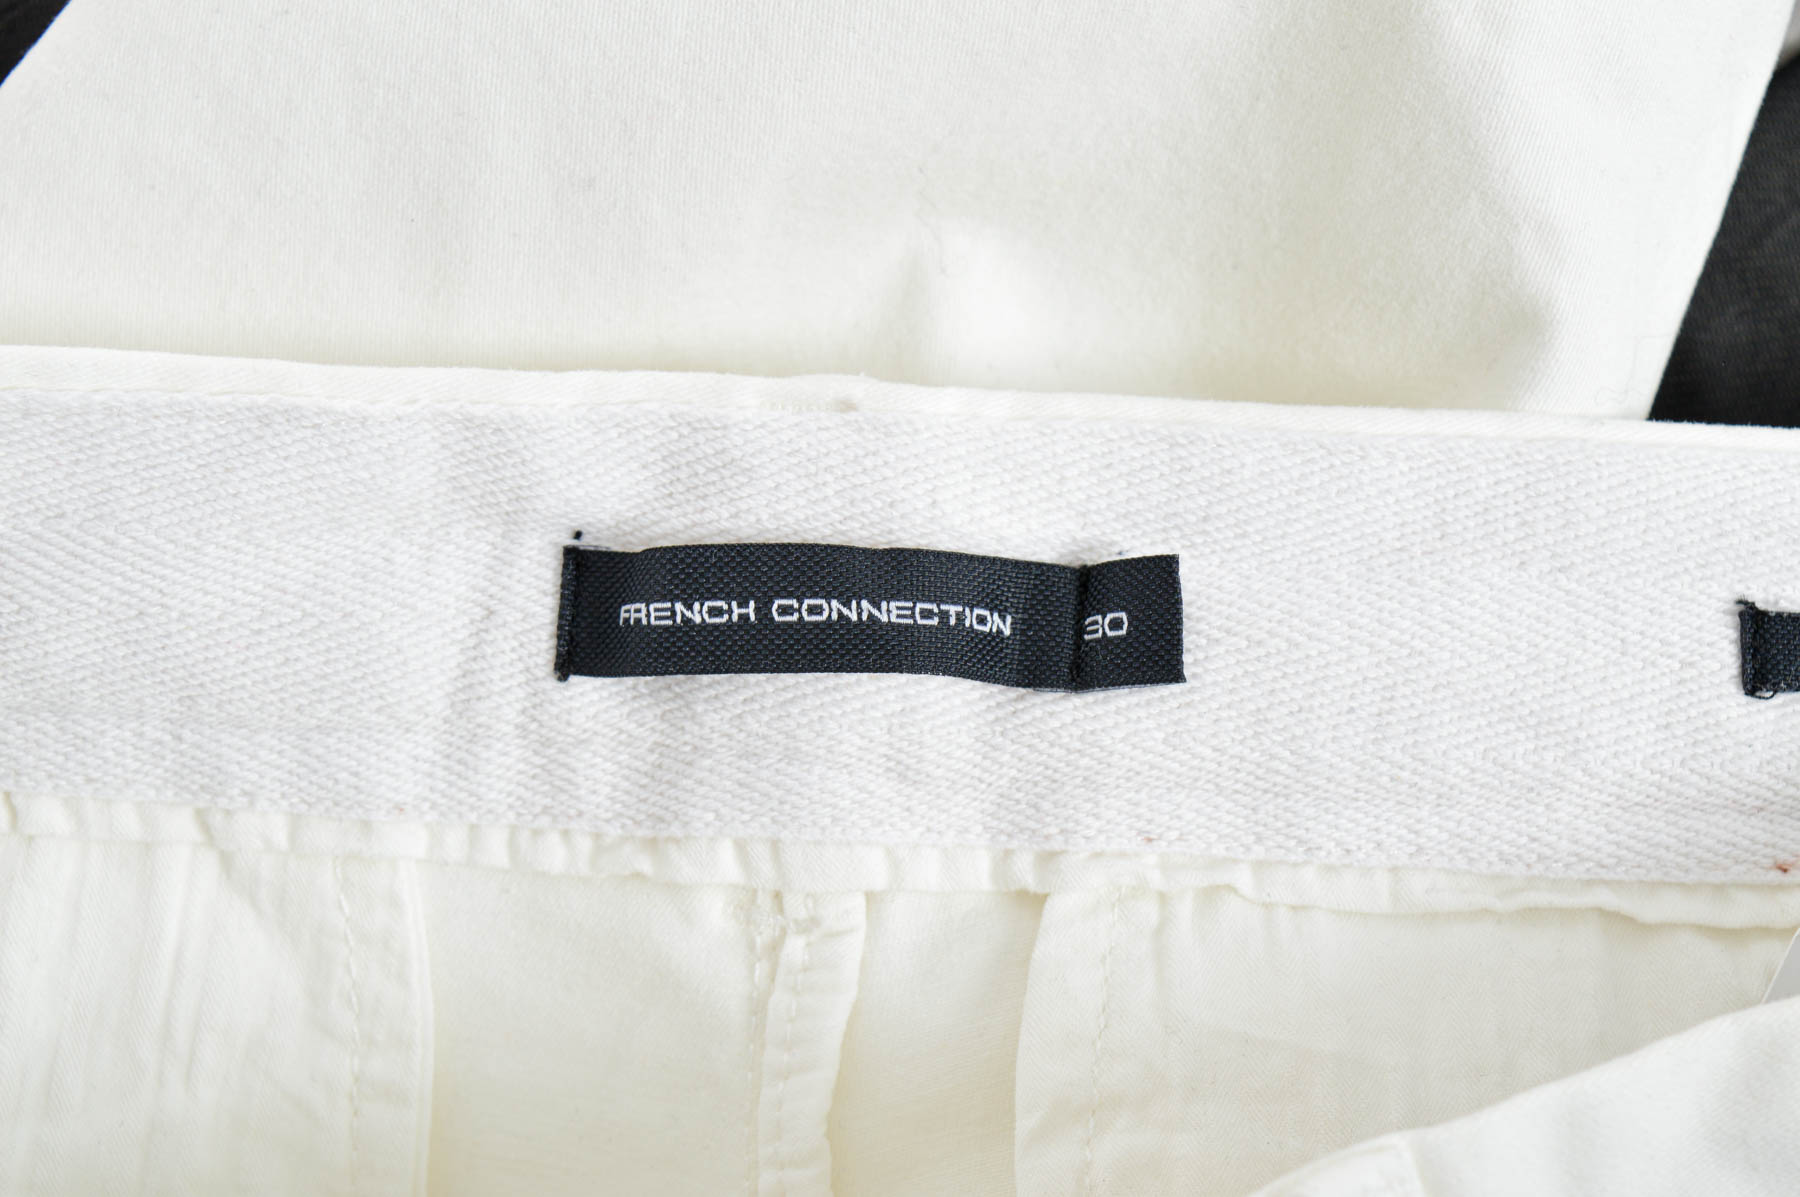 Men's trousers - French Connection - 2